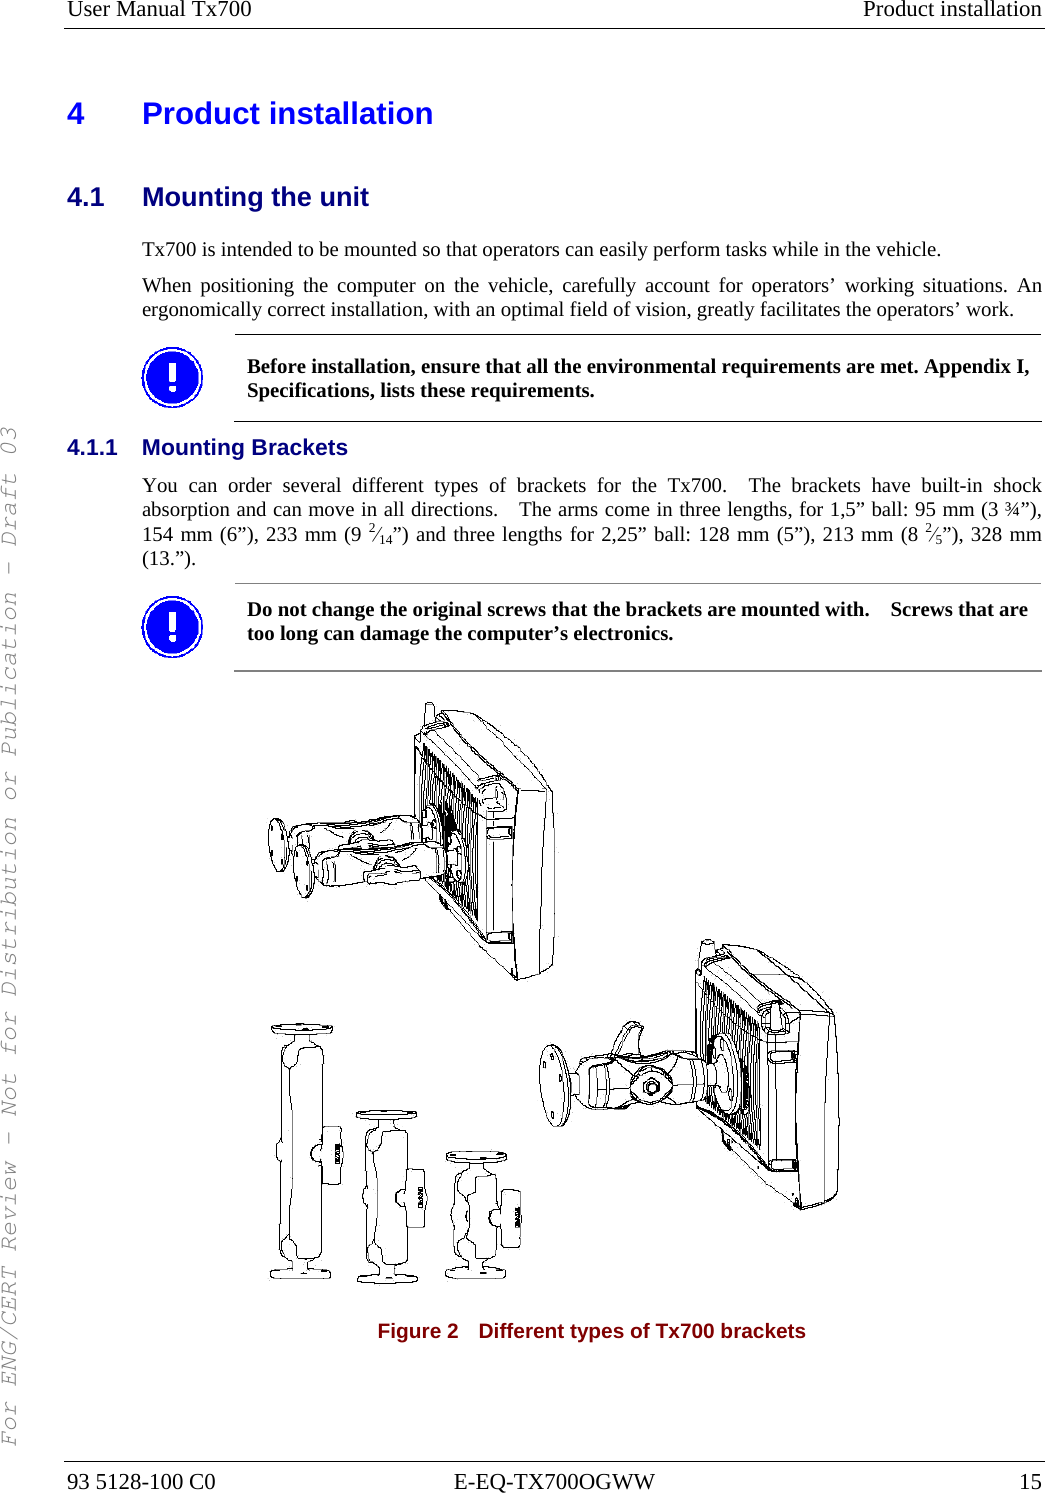 User Manual Tx700  Product installation 93 5128-100 C0  E-EQ-TX700OGWW  15 4 Product installation 4.1  Mounting the unit Tx700 is intended to be mounted so that operators can easily perform tasks while in the vehicle. When positioning the computer on the vehicle, carefully account for operators’ working situations. An ergonomically correct installation, with an optimal field of vision, greatly facilitates the operators’ work.  Before installation, ensure that all the environmental requirements are met. Appendix I, Specifications, lists these requirements. 4.1.1 Mounting Brackets You can order several different types of brackets for the Tx700.  The brackets have built-in shock absorption and can move in all directions.    The arms come in three lengths, for 1,5” ball: 95 mm (3 ¾”), 154 mm (6”), 233 mm (9 2⁄14”) and three lengths for 2,25” ball: 128 mm (5”), 213 mm (8 2⁄5”), 328 mm (13.”).  Do not change the original screws that the brackets are mounted with.    Screws that are too long can damage the computer’s electronics.  Figure 2    Different types of Tx700 brackets For ENG/CERT Review - Not for Distribution or Publication - Draft 03